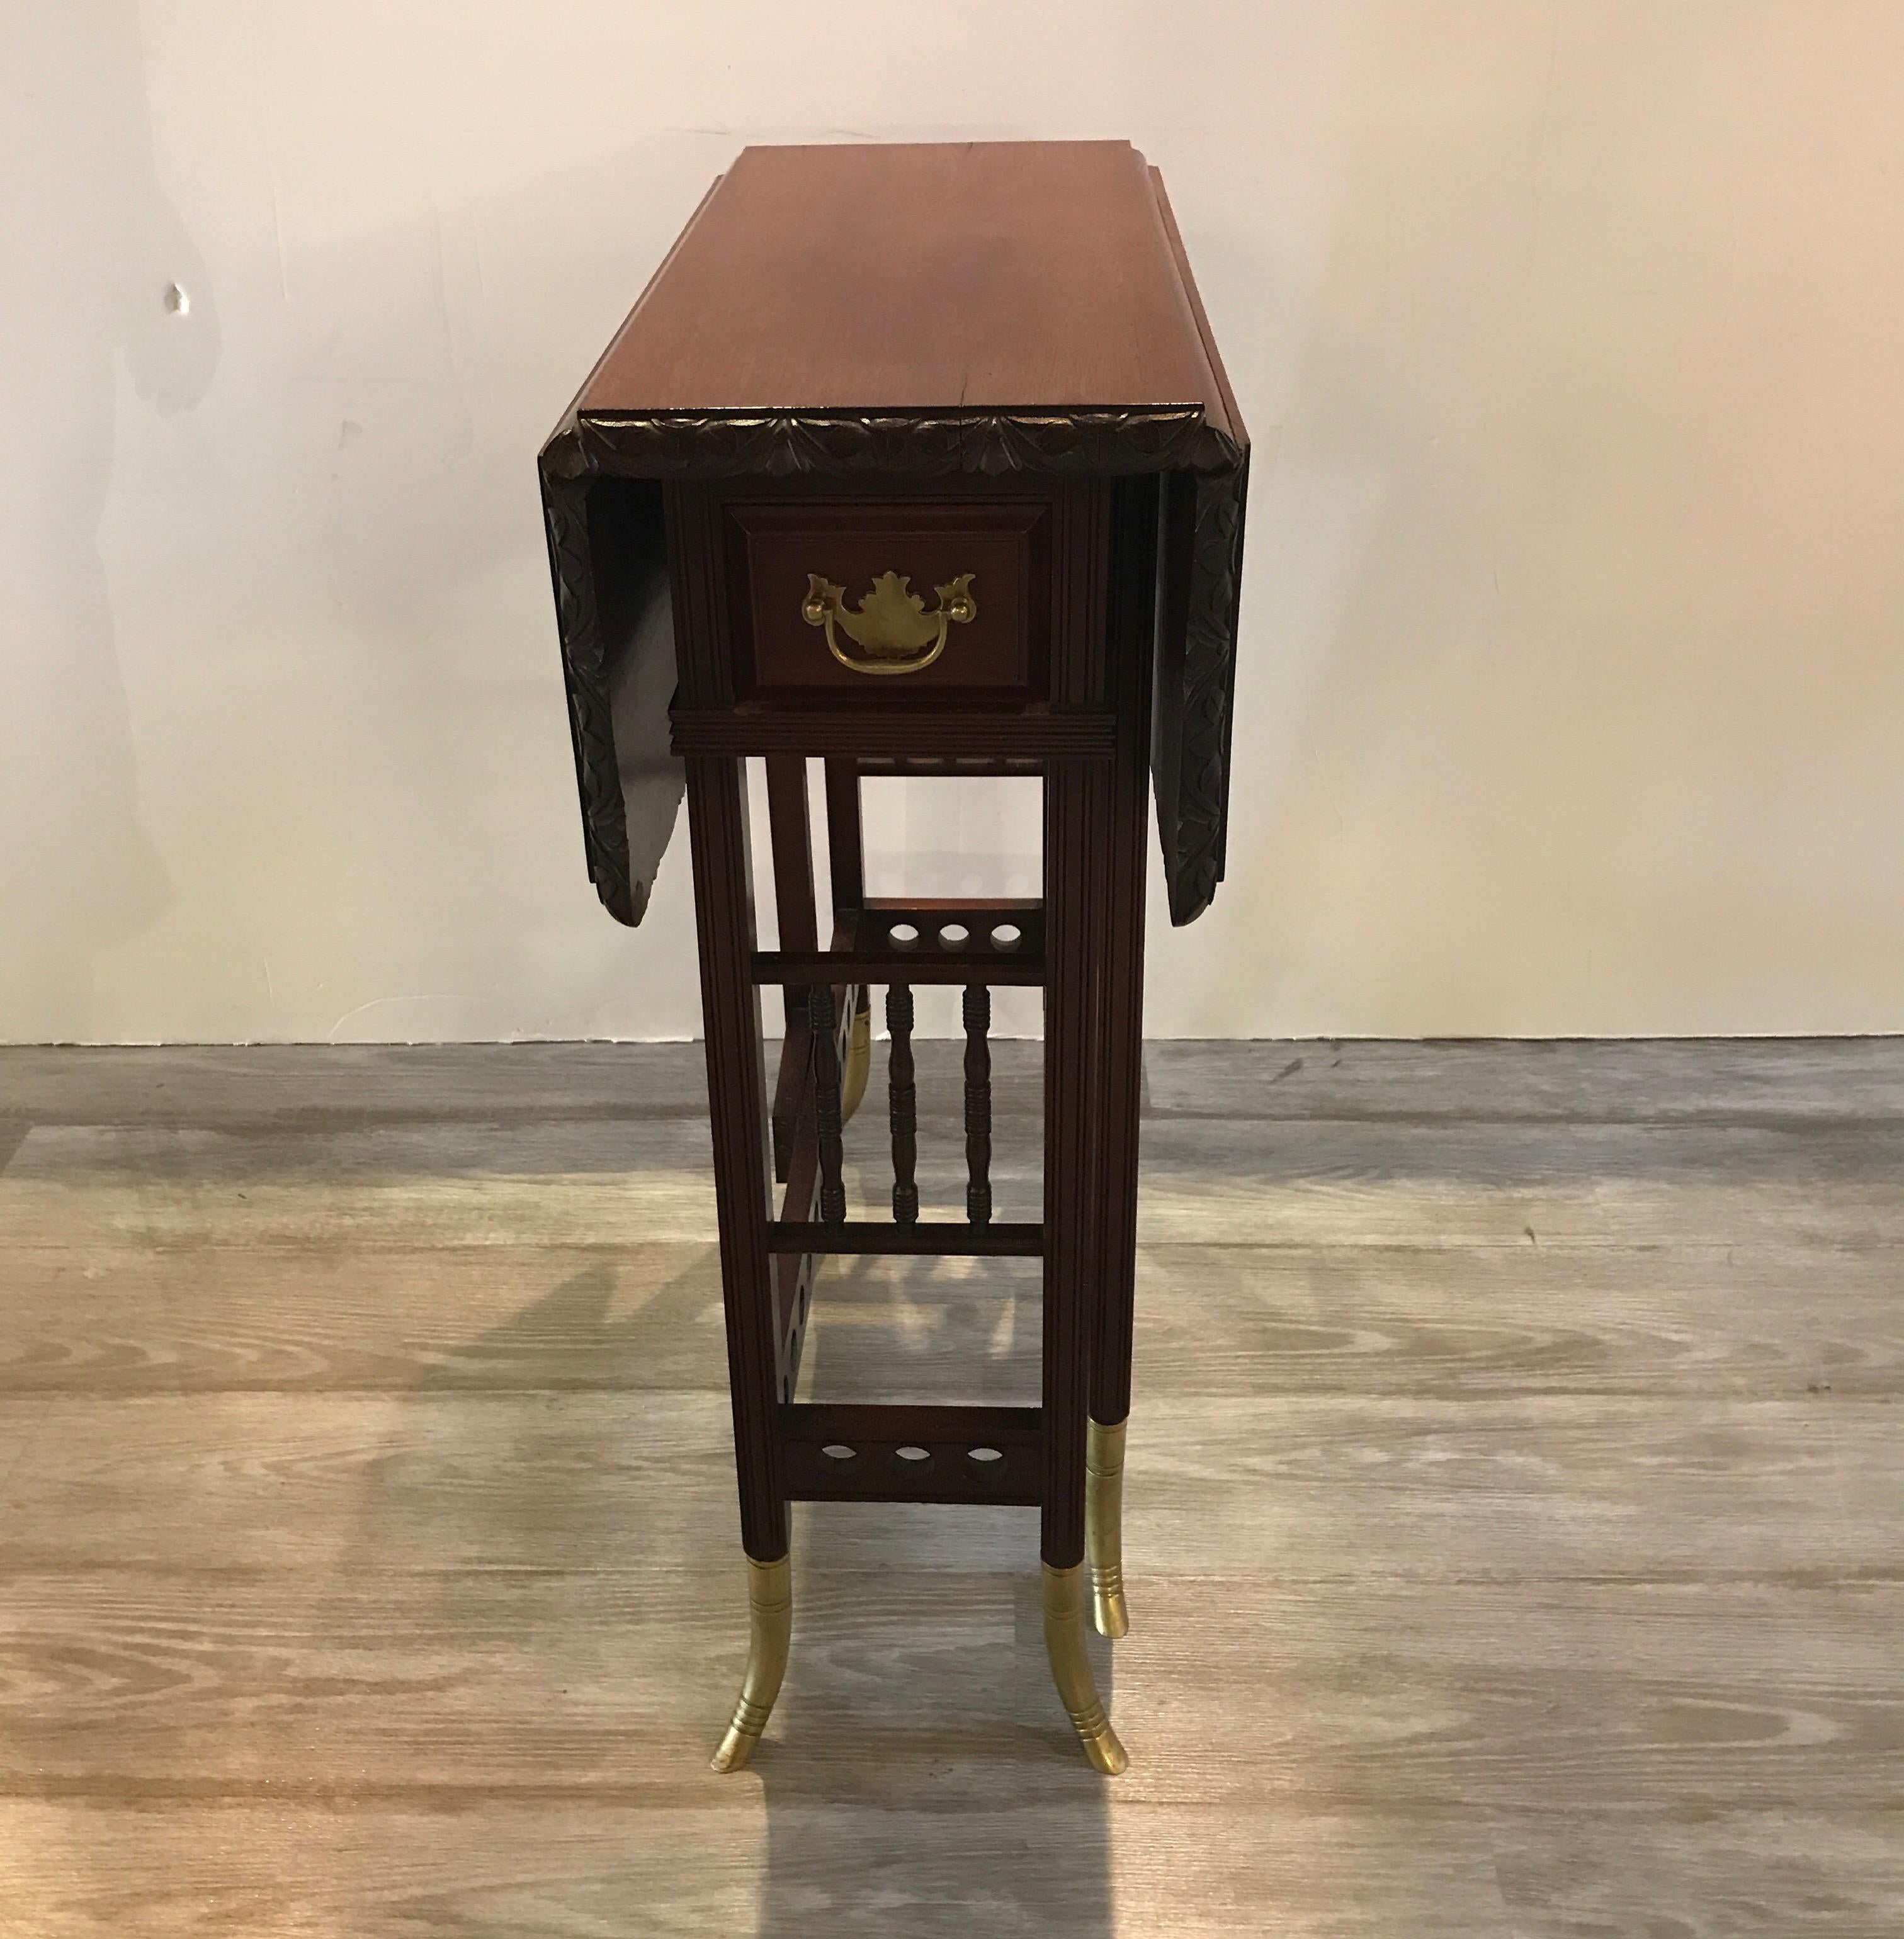 Exceptional drop leaf card table with original bronze mounts and small center drawer. The narrow table with carved edge with generous drop leaf on each side. The brass feet are a classic style of A & H Lejambre during the aesthetic movement of the